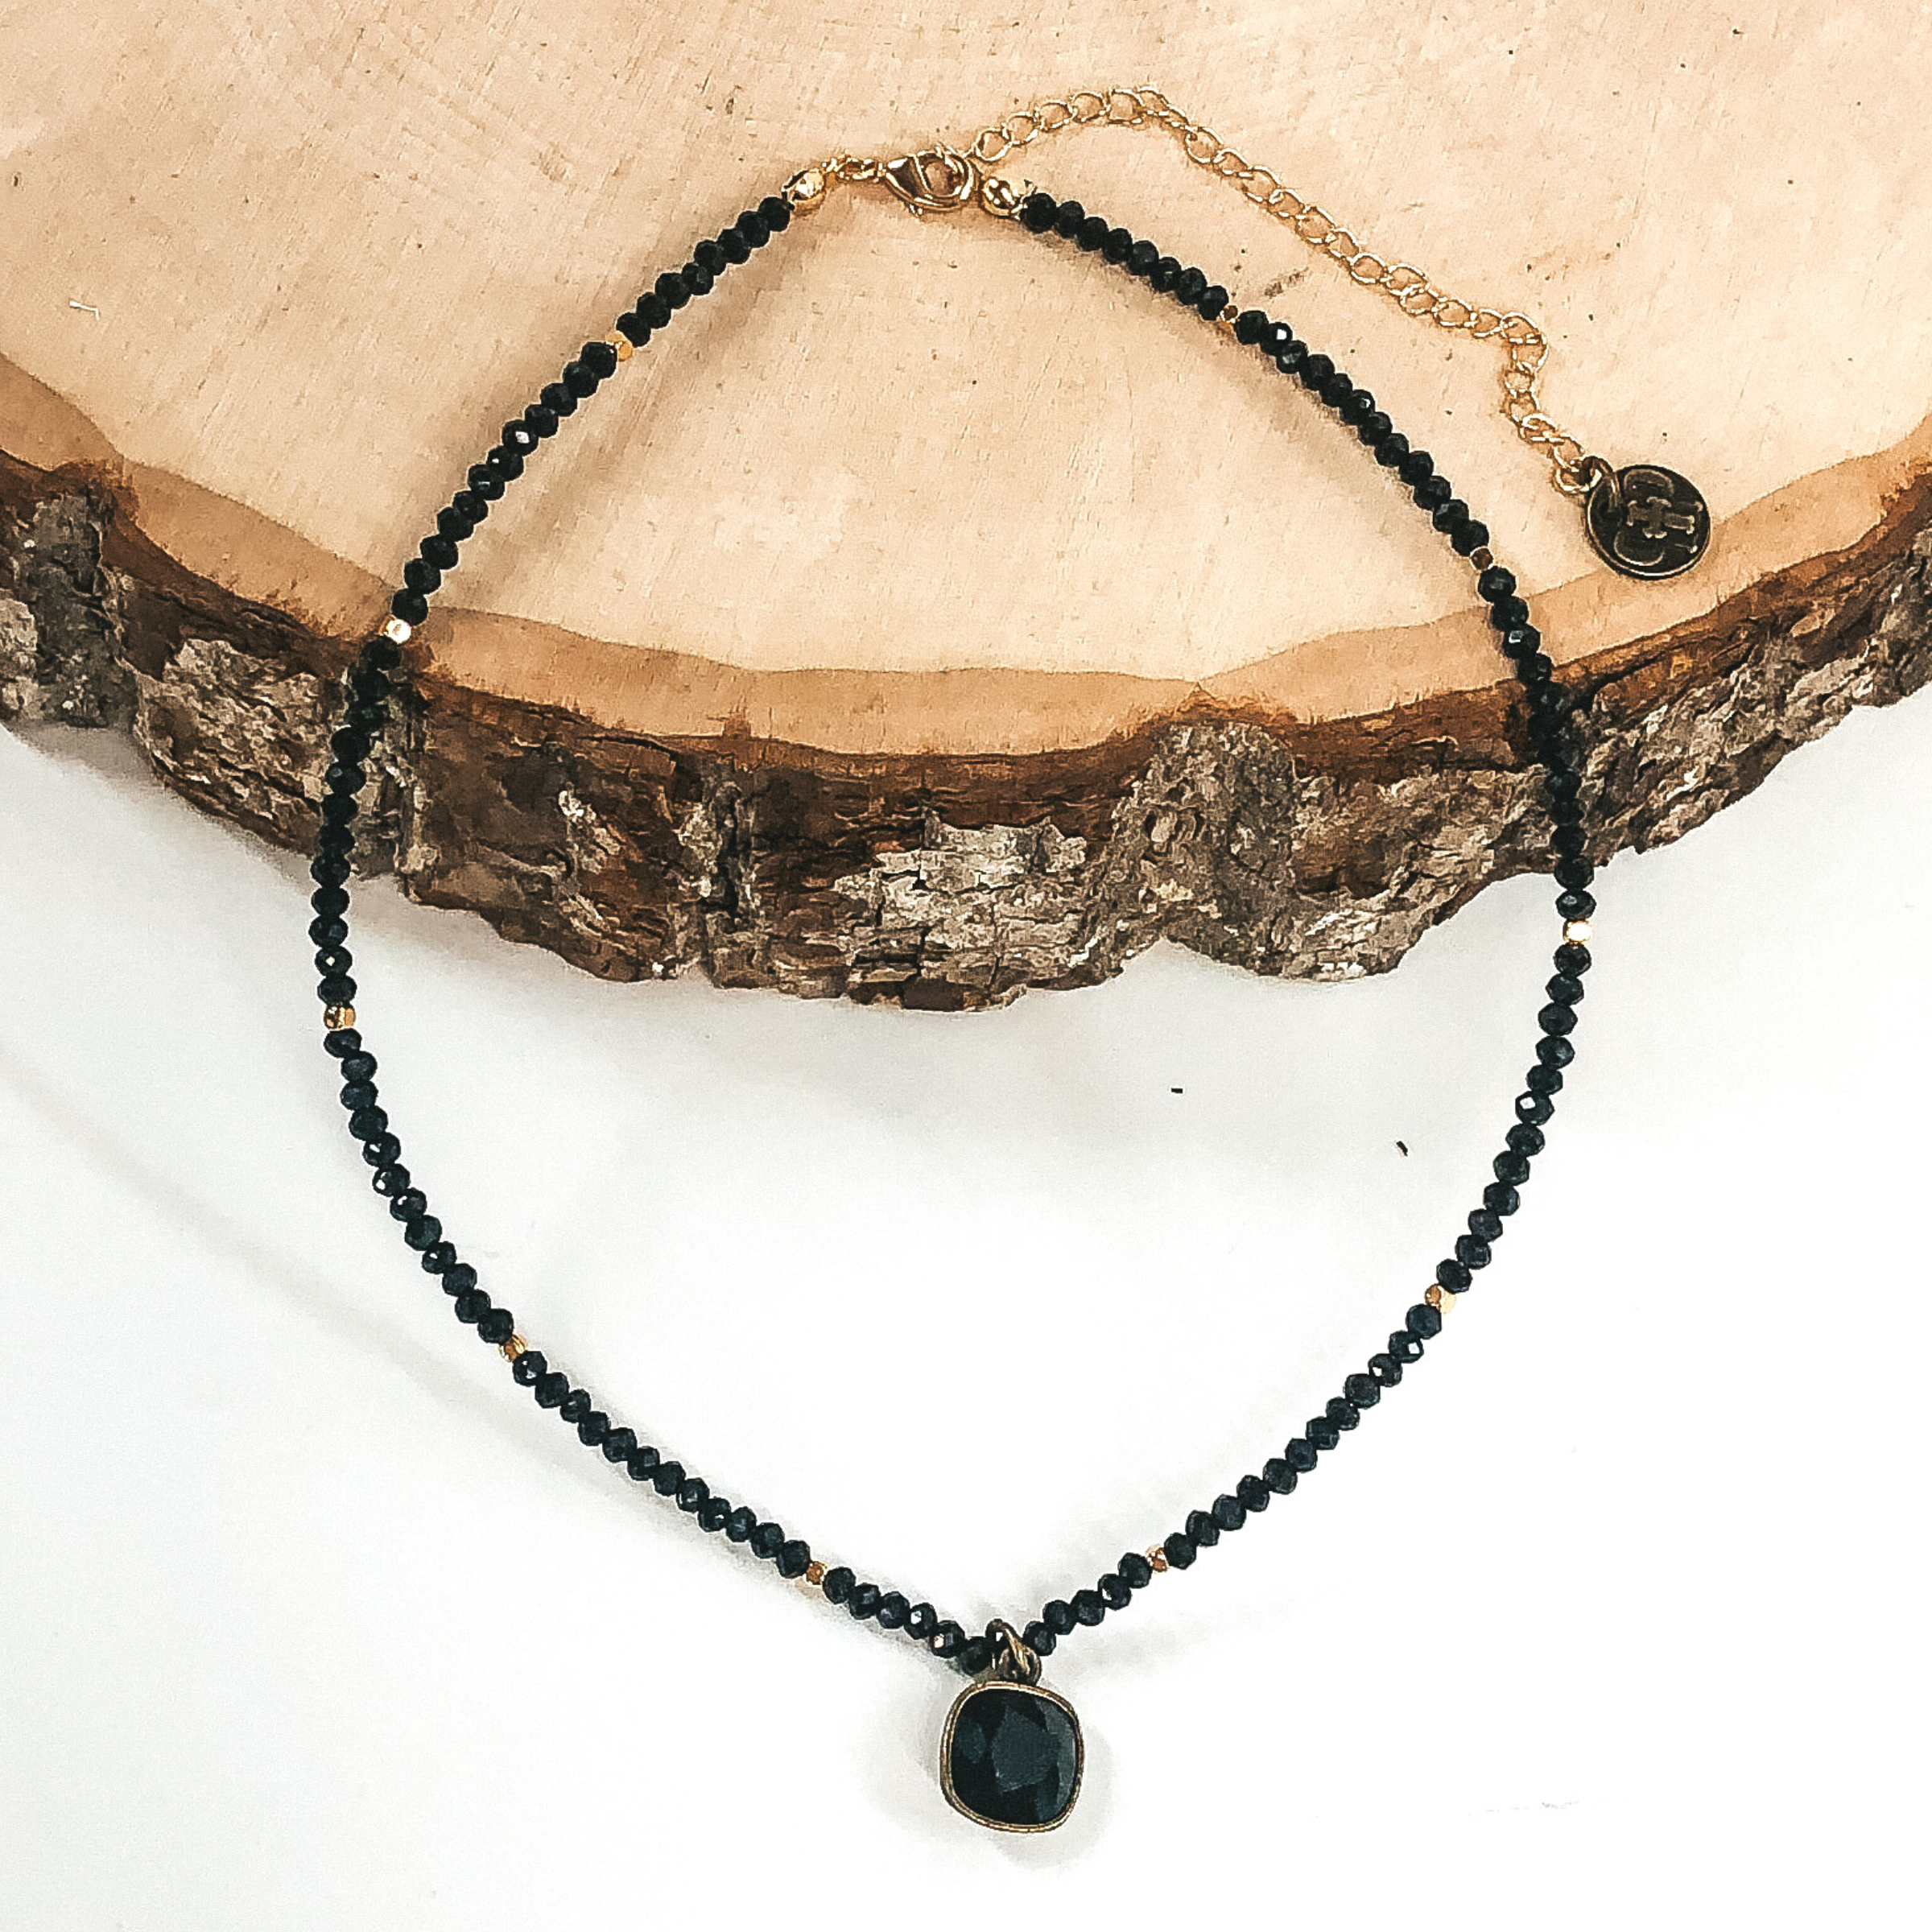 This necklace has black crystal beads for the necklace with gold beaded spacers. There is also a single hanging cushion cut black crystal in a bronze setting. This necklace is pictured laying partially on a piece of wood on a white background.